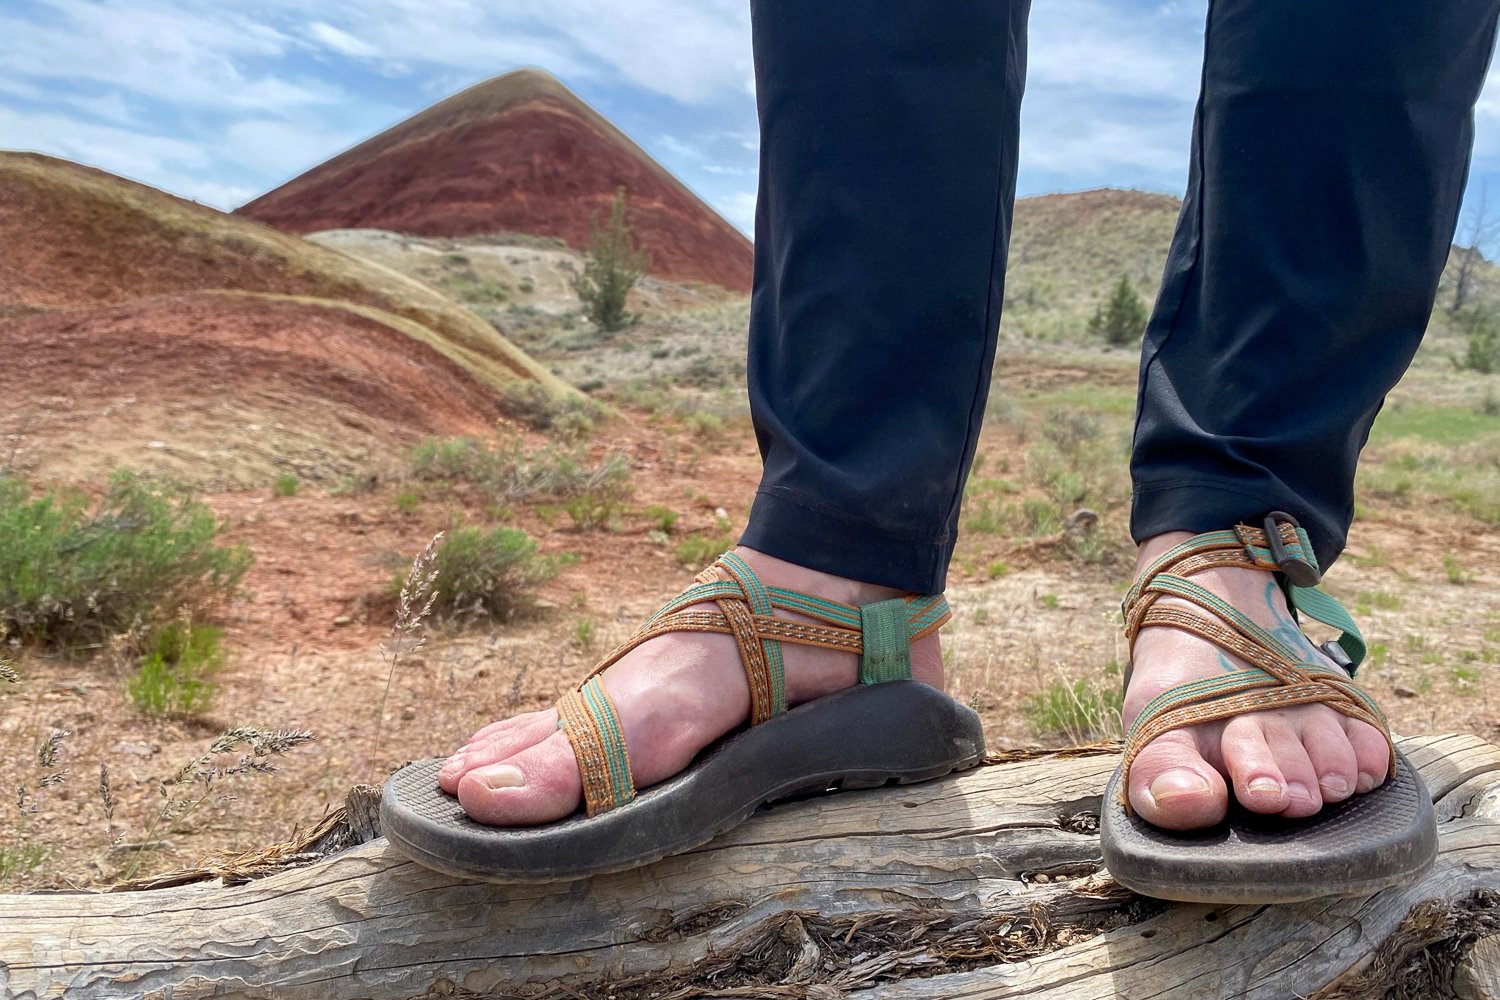 Closeup of the Chaco ZX/2 Classic Sandals in front of the Painted Hills in Oregon